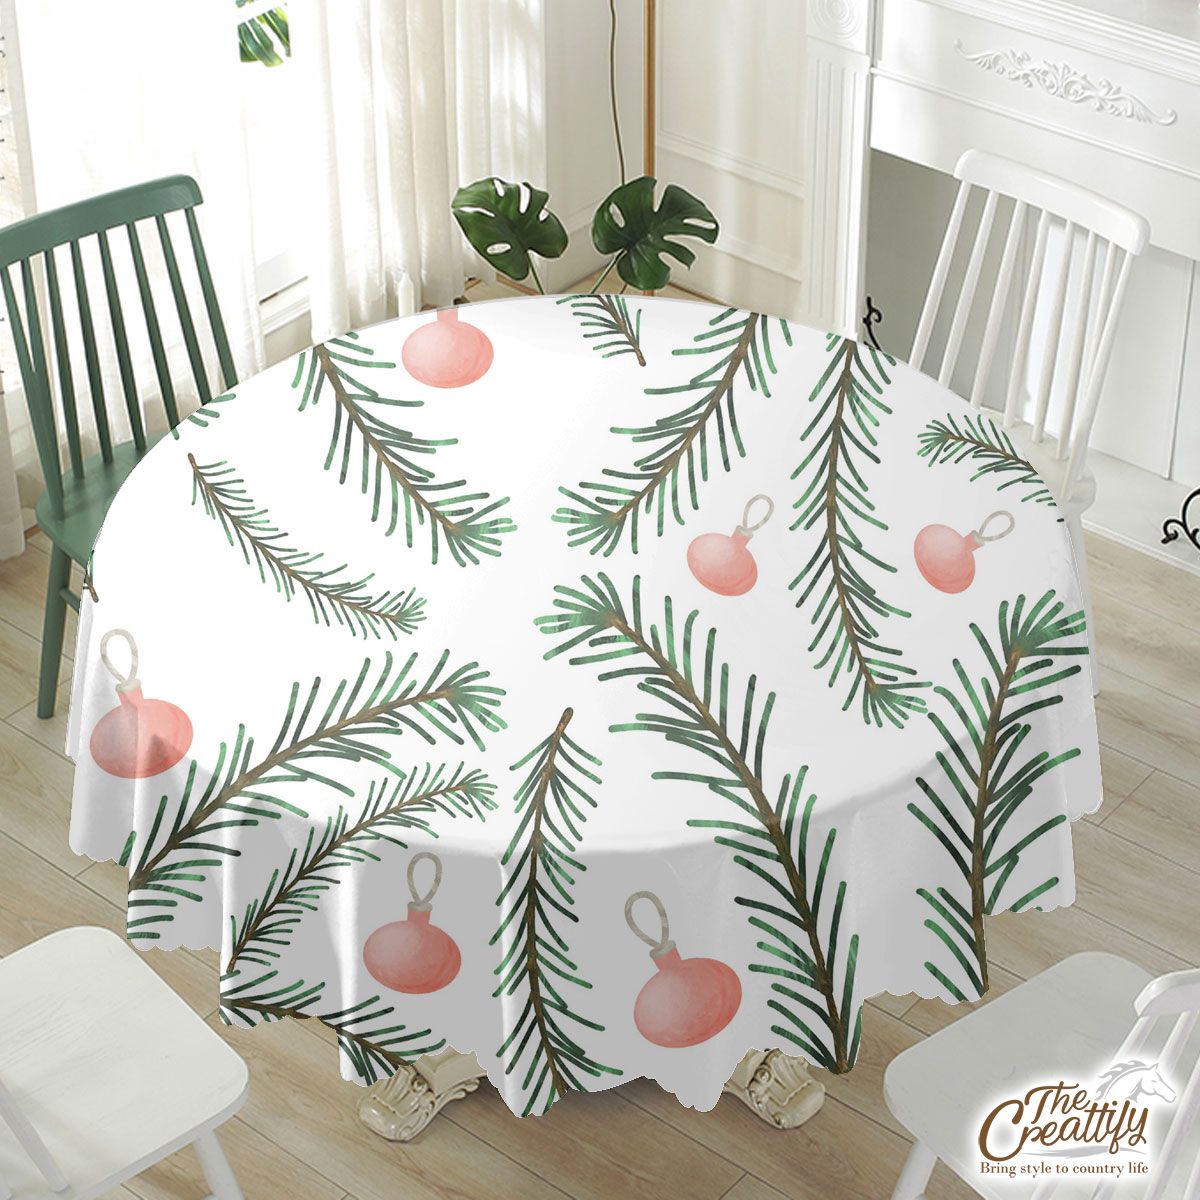 Christmas Balls, Christmas Tree Branches White Pattern Waterproof Tablecloth